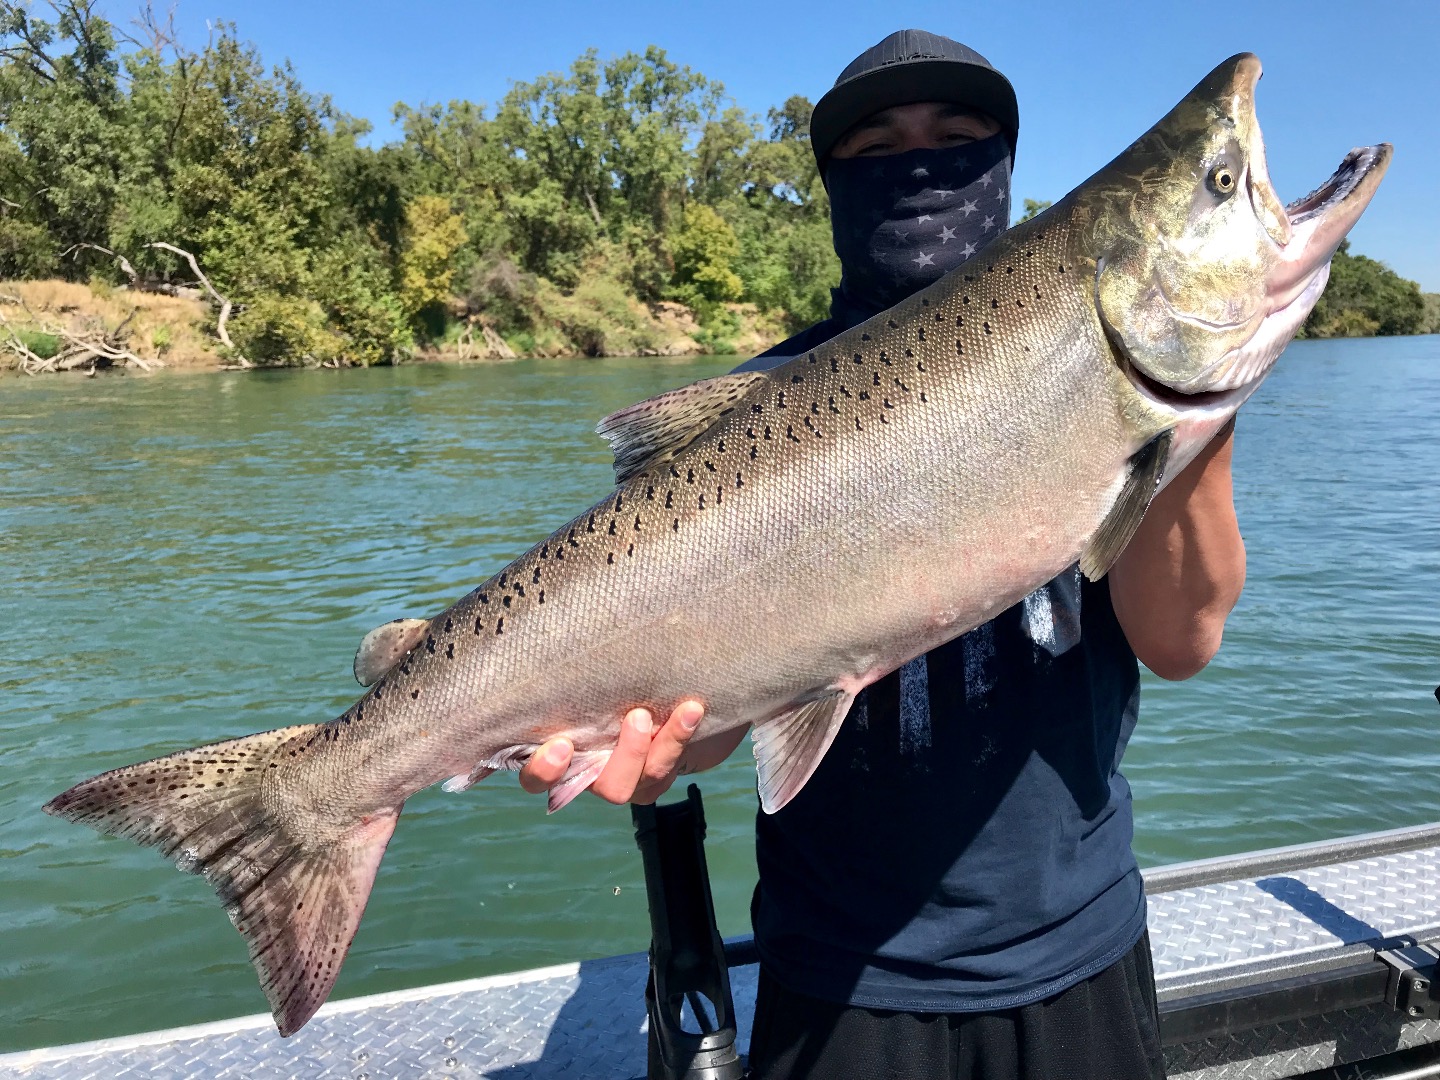 Sac River chrome in our nets today!